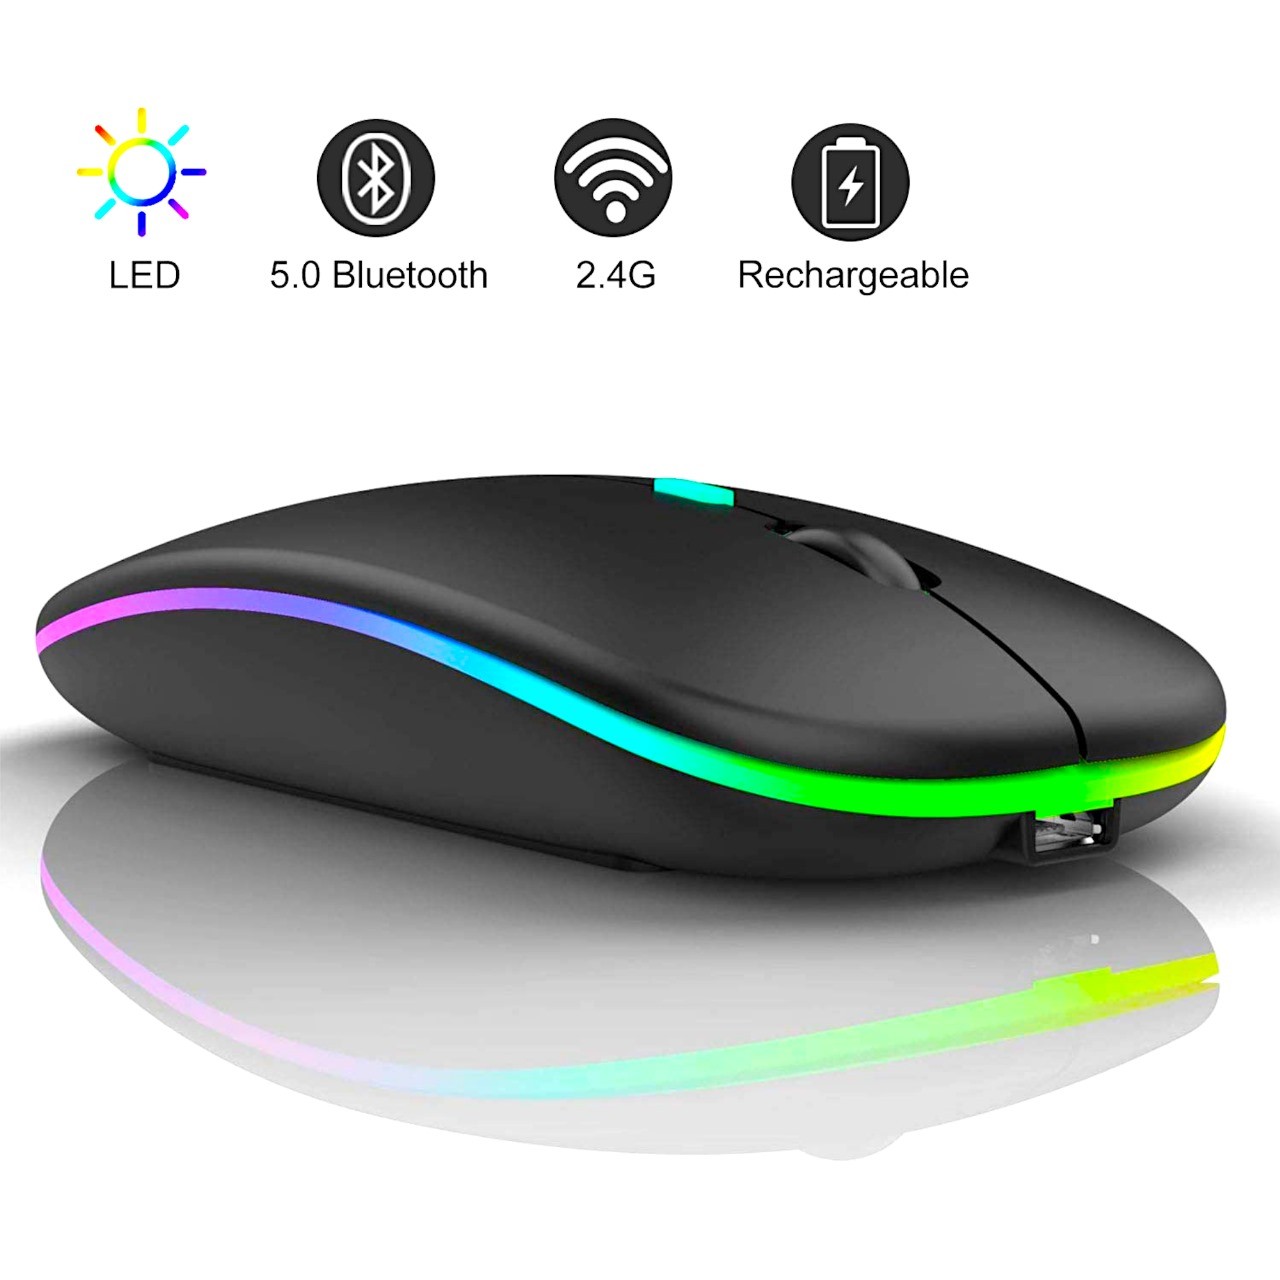 Dezful 2.4 Ghz Wireless+ Bluetooth 5.1 Gaming Mouse, Multi Device Dual Mode Slim Rechargeable Mouse Wireless Silent Click +blutooth Mouse 3 Adjustable DPI, Works on Multi Device Mouse